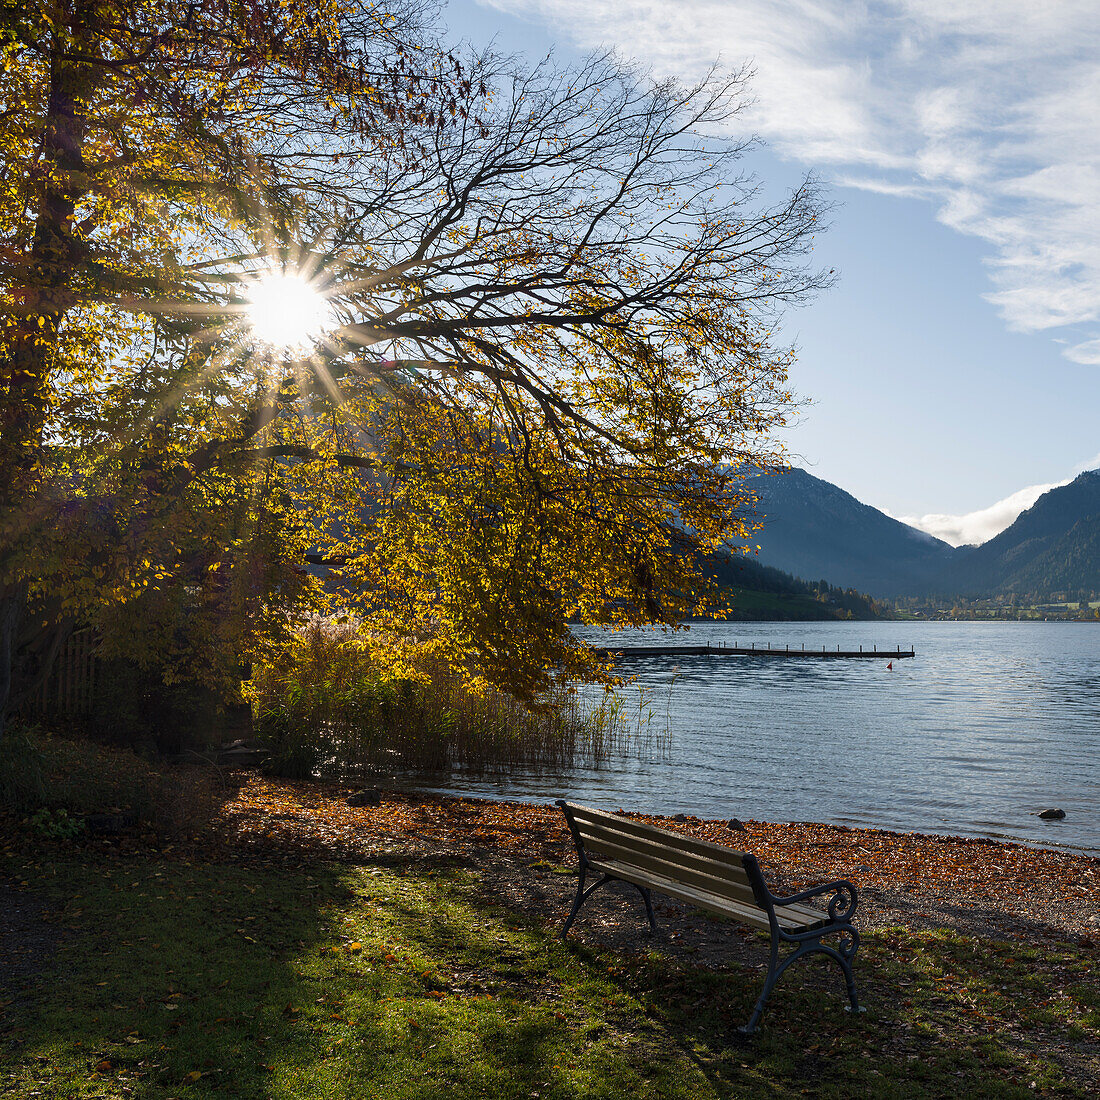 Sunrise at lake and village Schliersee in the Bavarian Alps during autumn, Bavaria, Germany